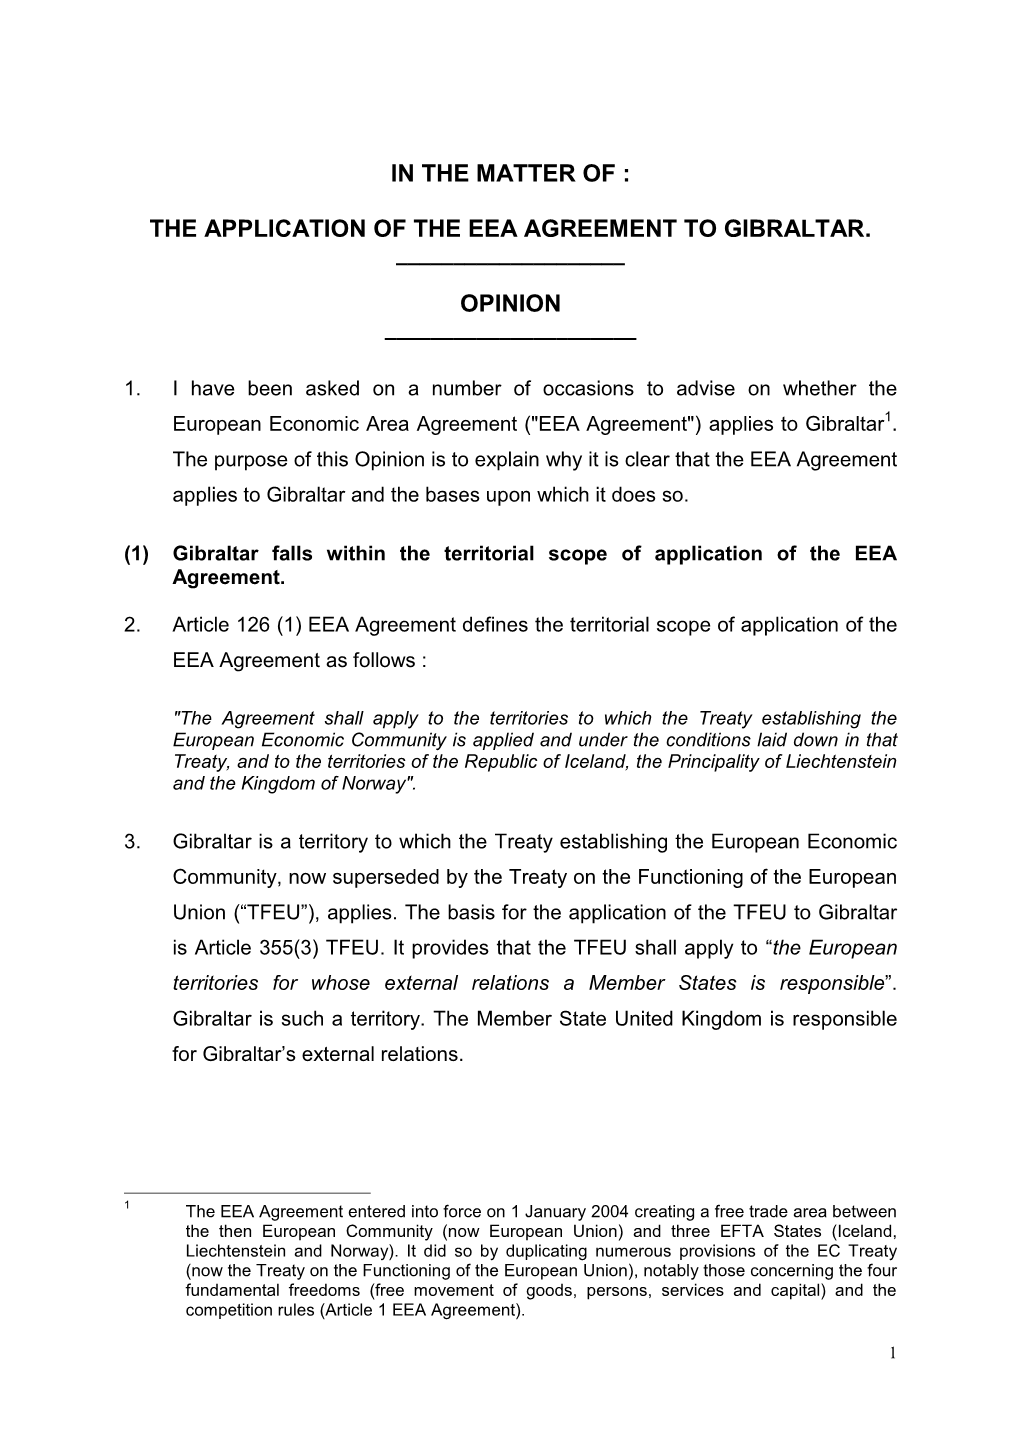 Application of the Eea Agreement to Gibraltar